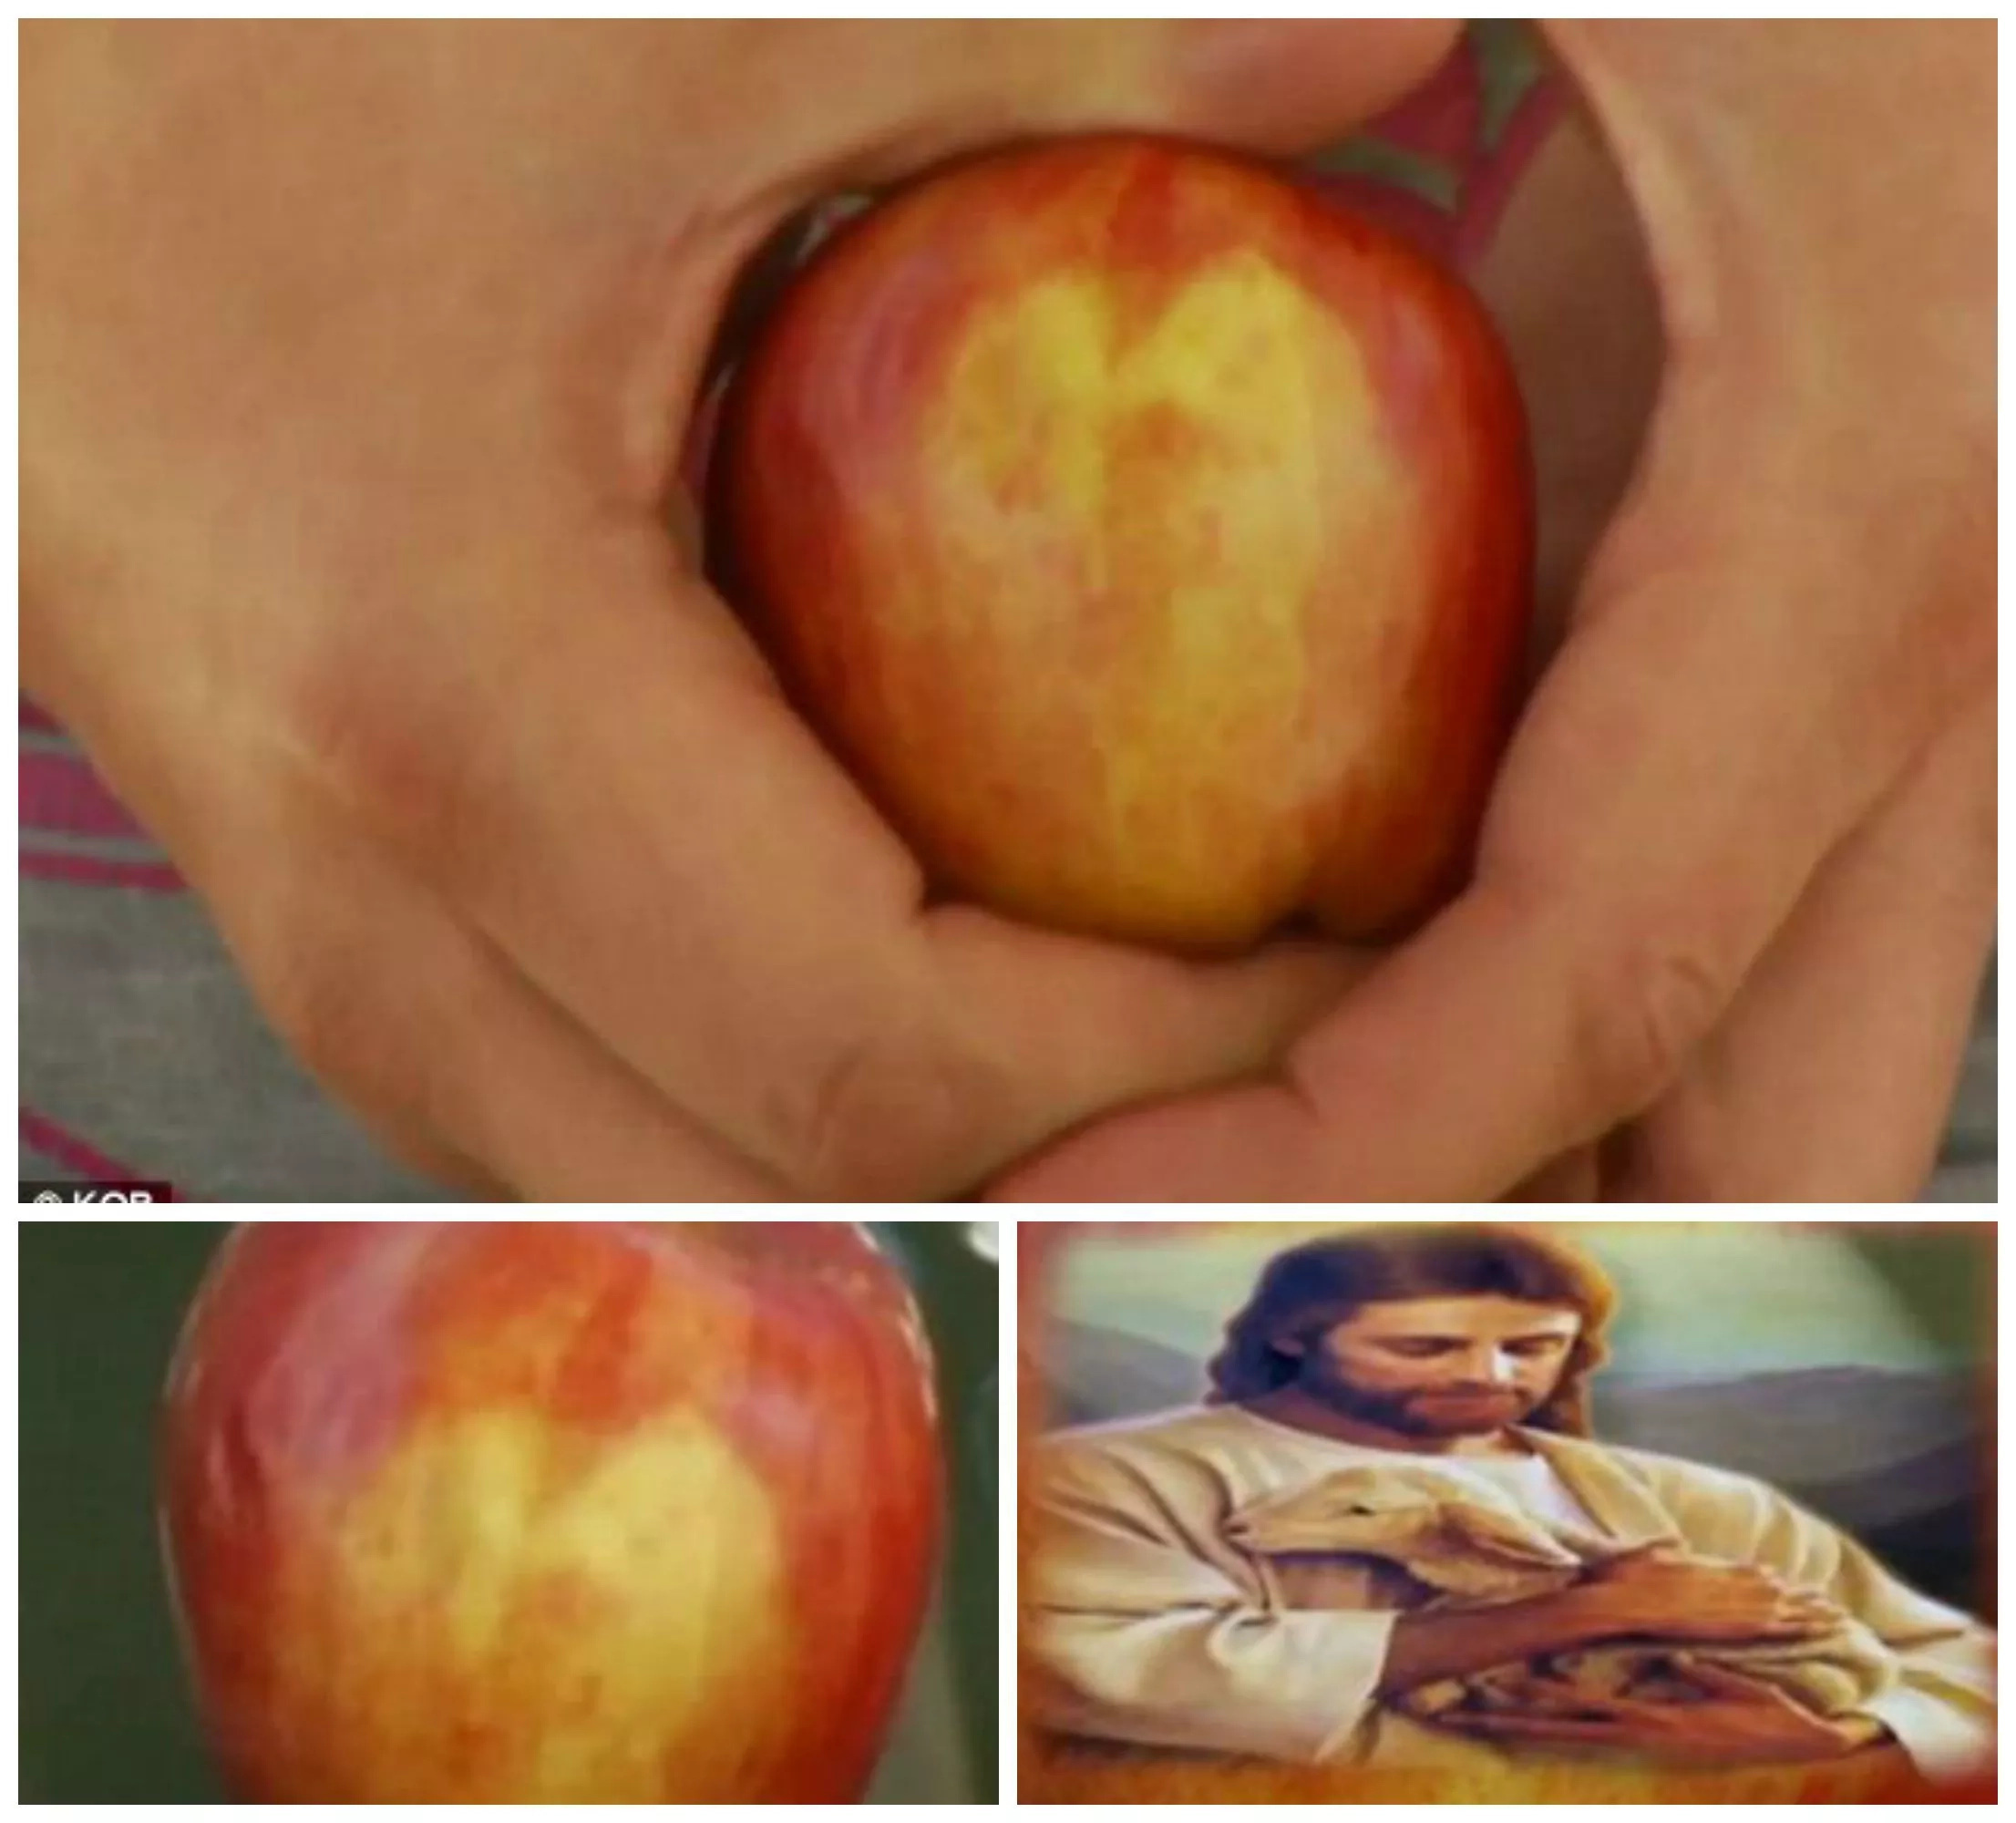 Top 10 Times Jesus' Face Appears In Inanimate Objects